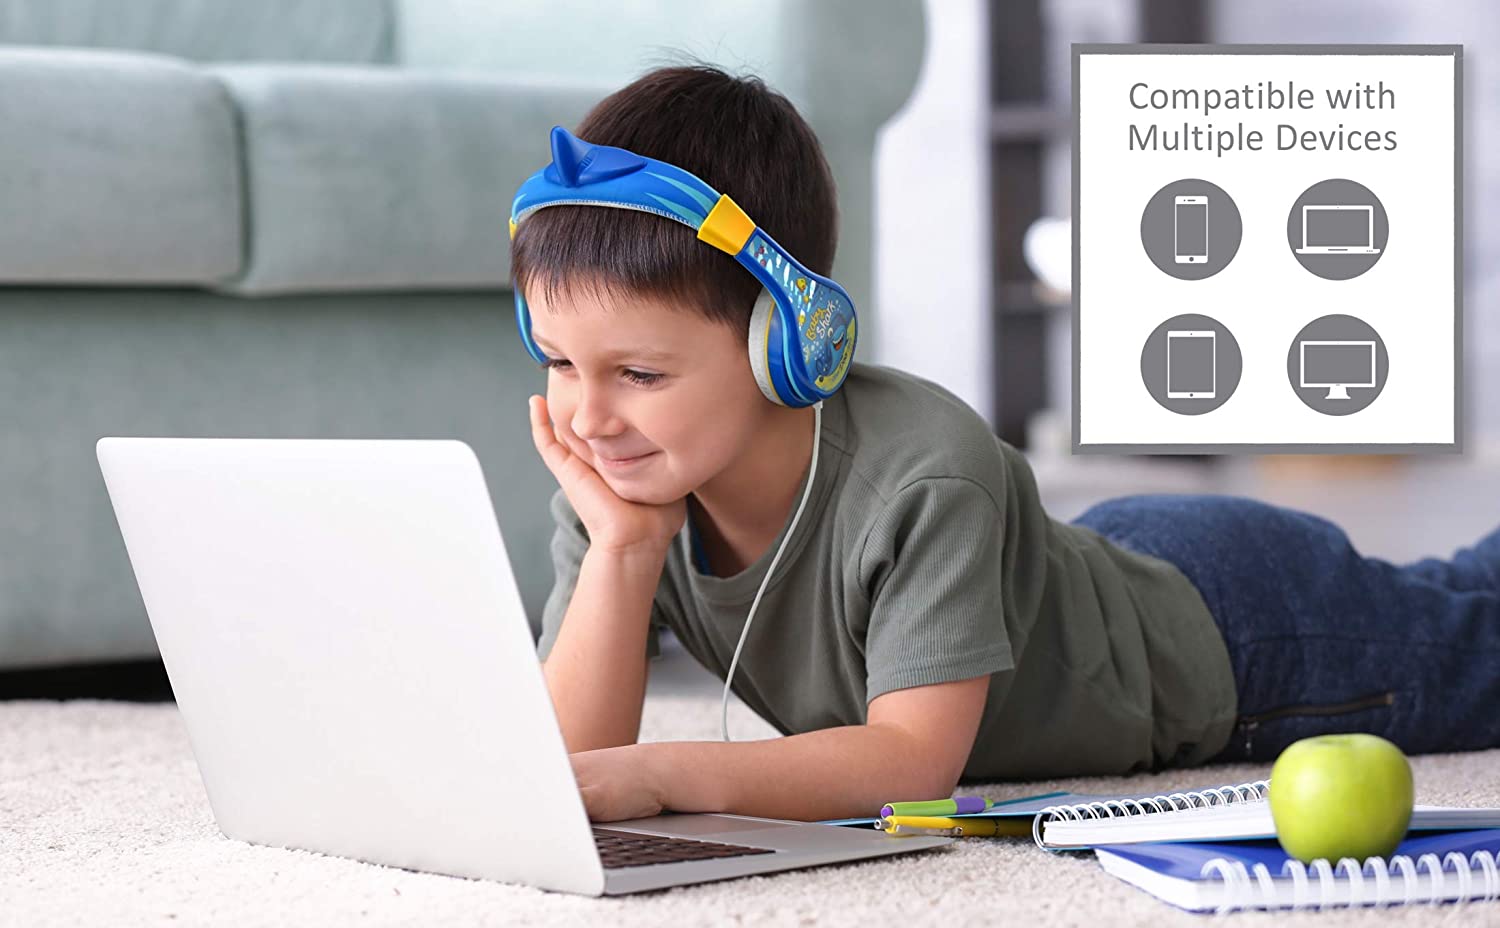 KIDdesigns Baby Shark Wired Headphones - Built in Volume Limiting Feature for Kid Friendly Safe Listening | Adjustable Headband, 3 Volume Settings | Great Stereo Sound  3.5mm connectivity - Blue